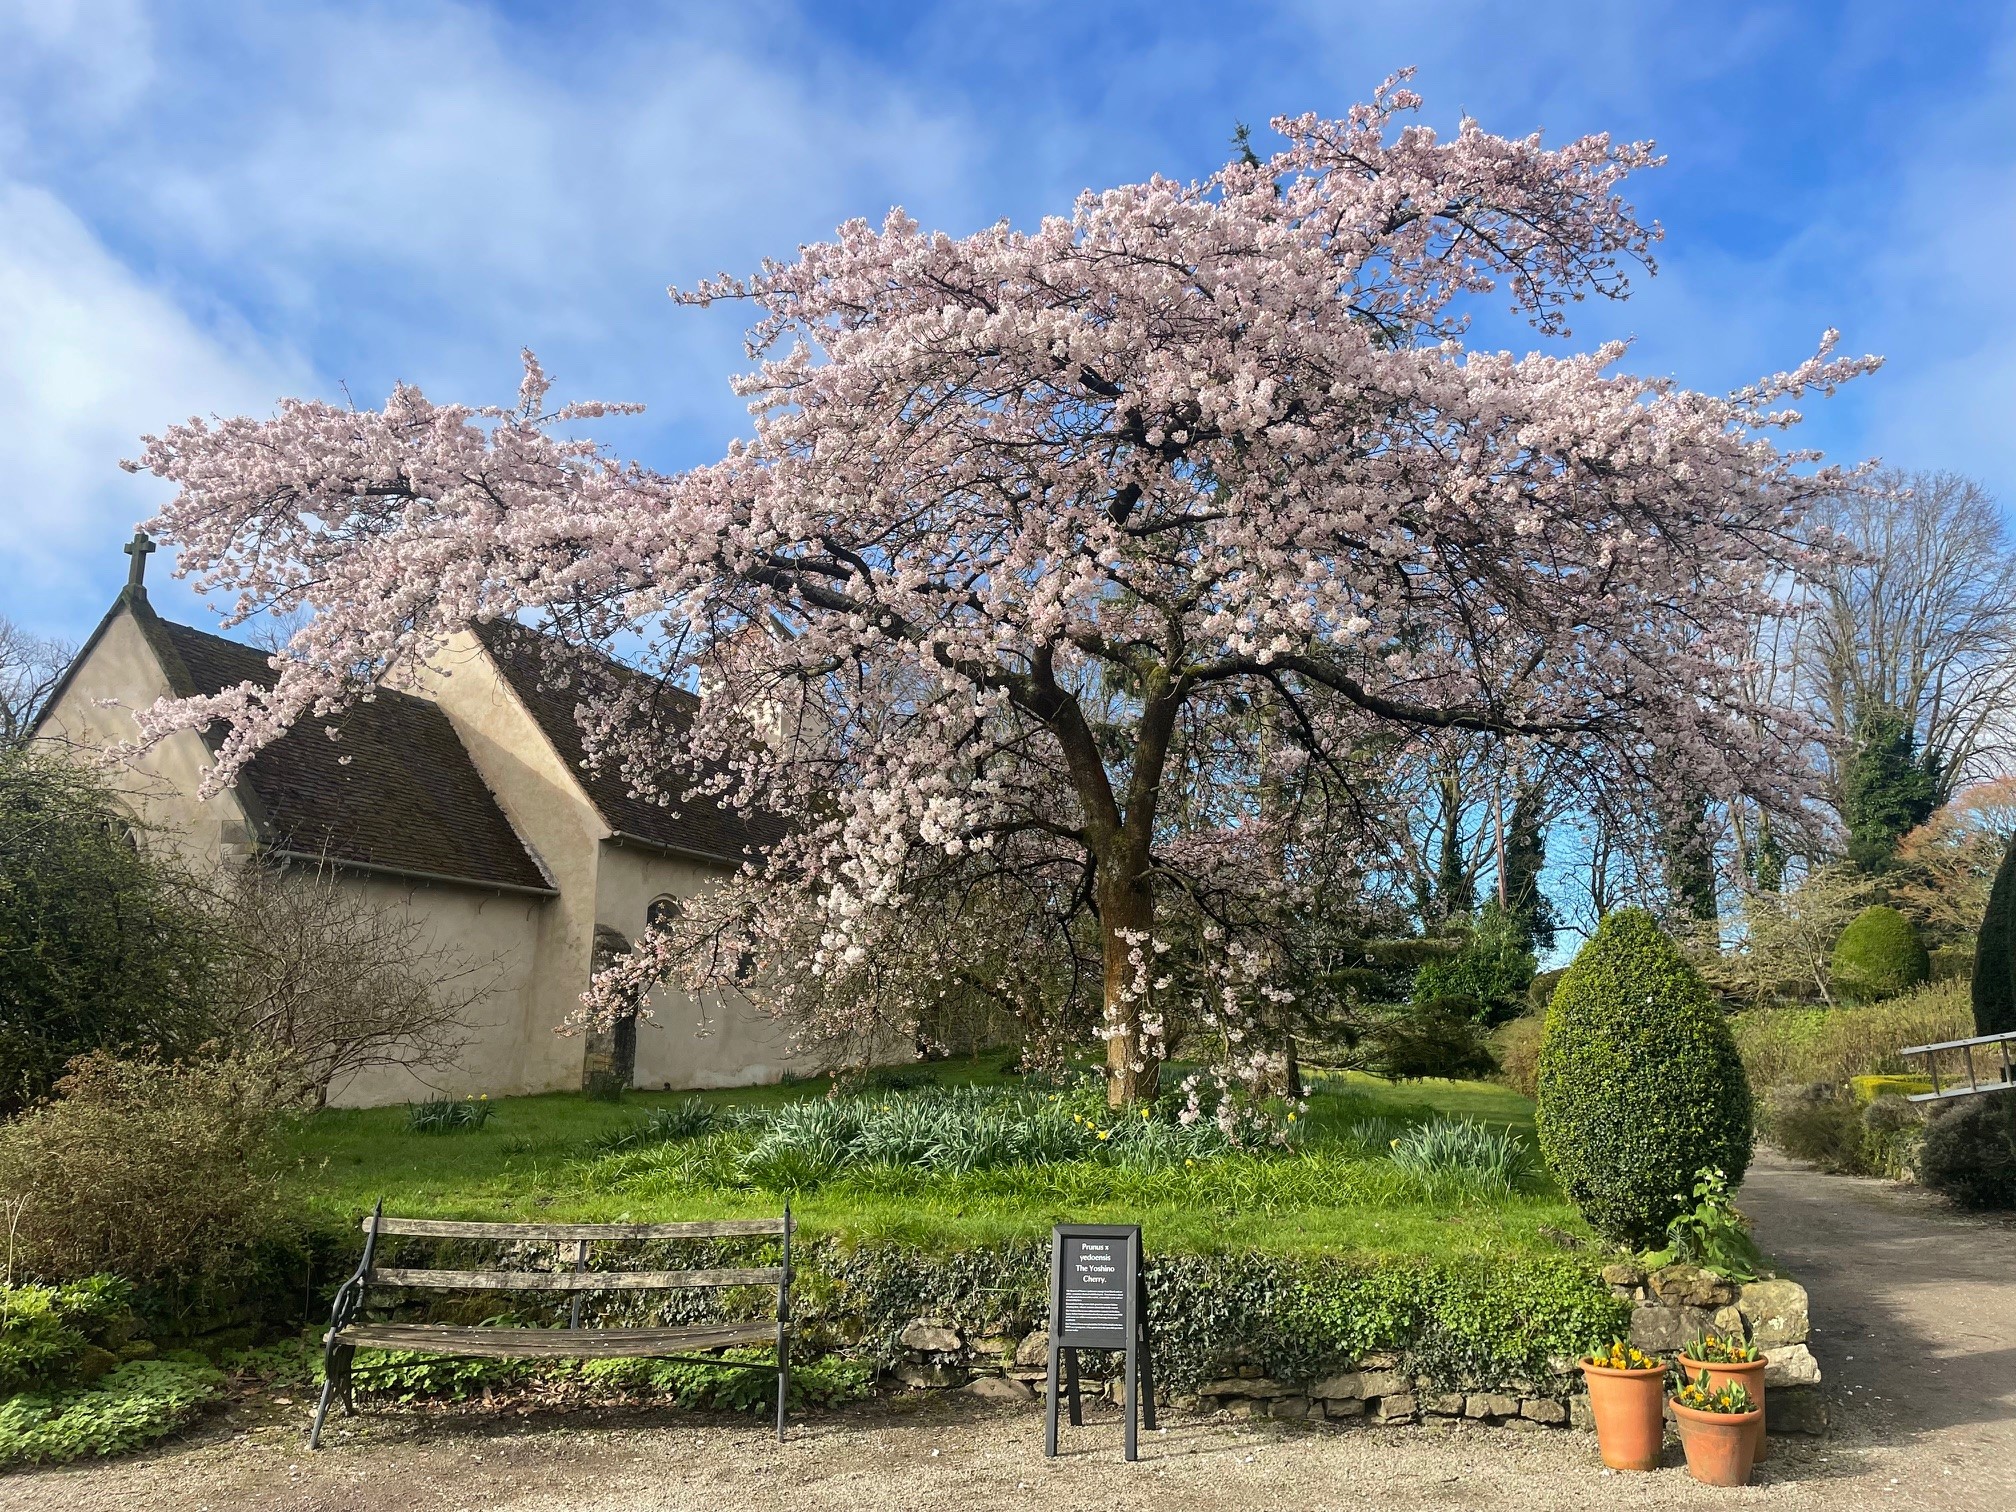 A large cherry tree covered in pale pink blossom stands on a lawn in front of a building